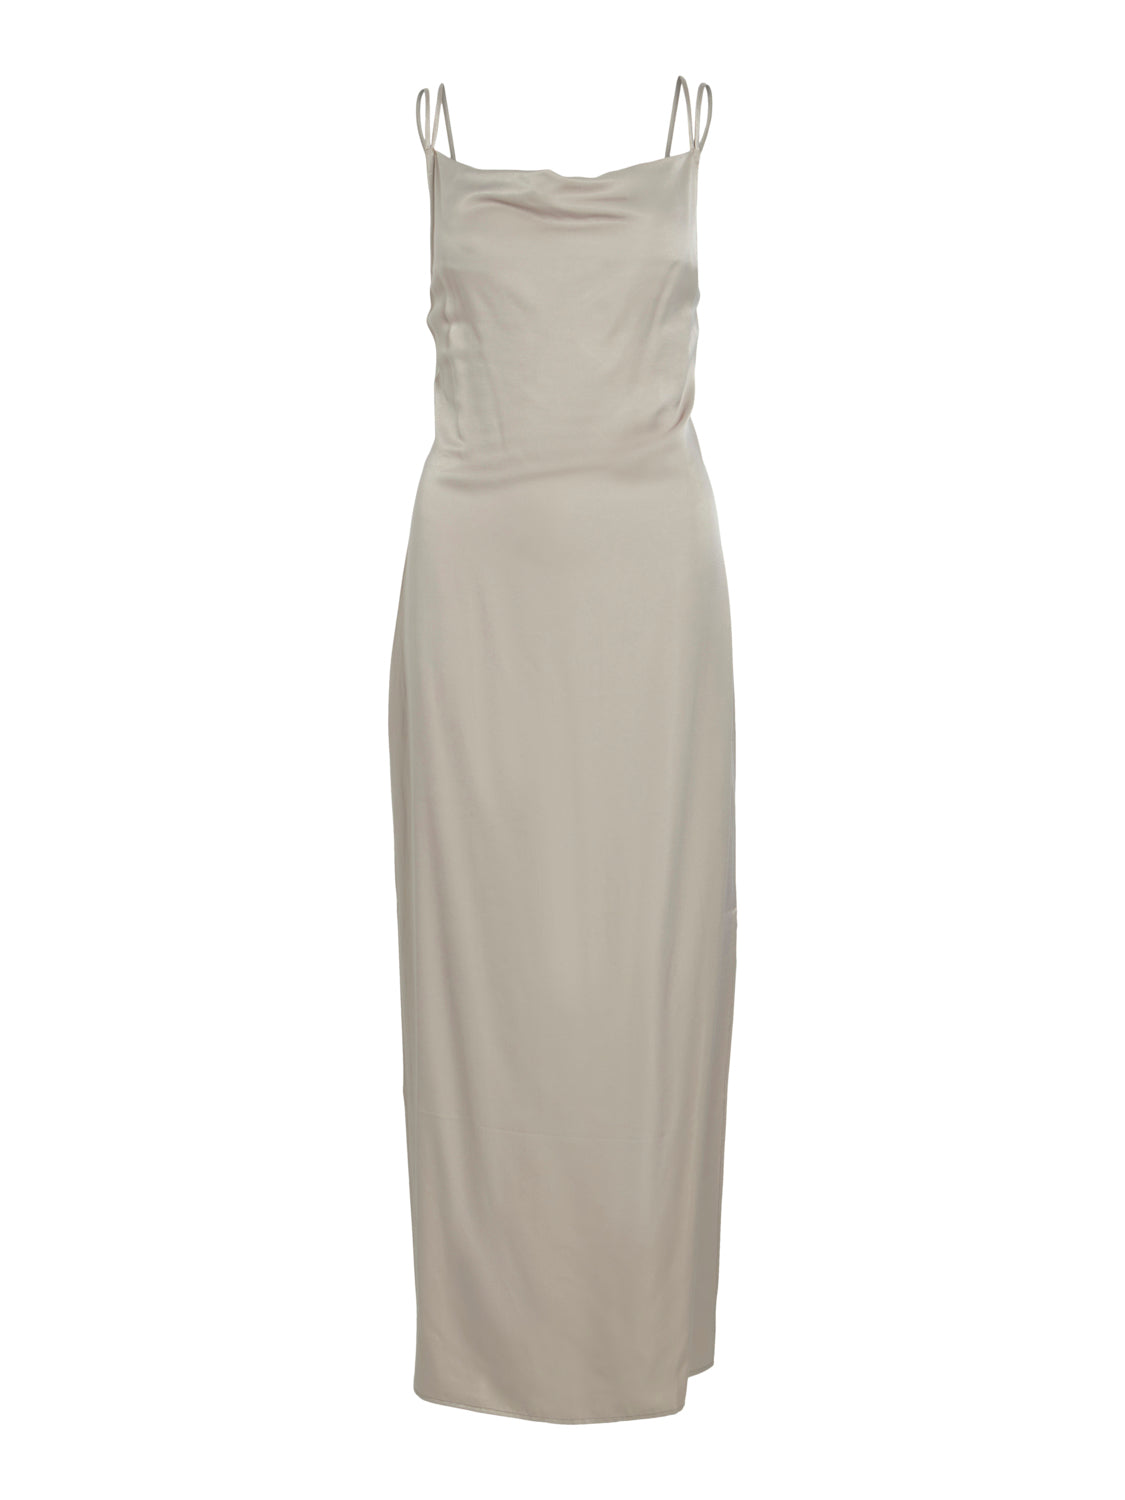 VIMADELYN Dress - Simply Taupe